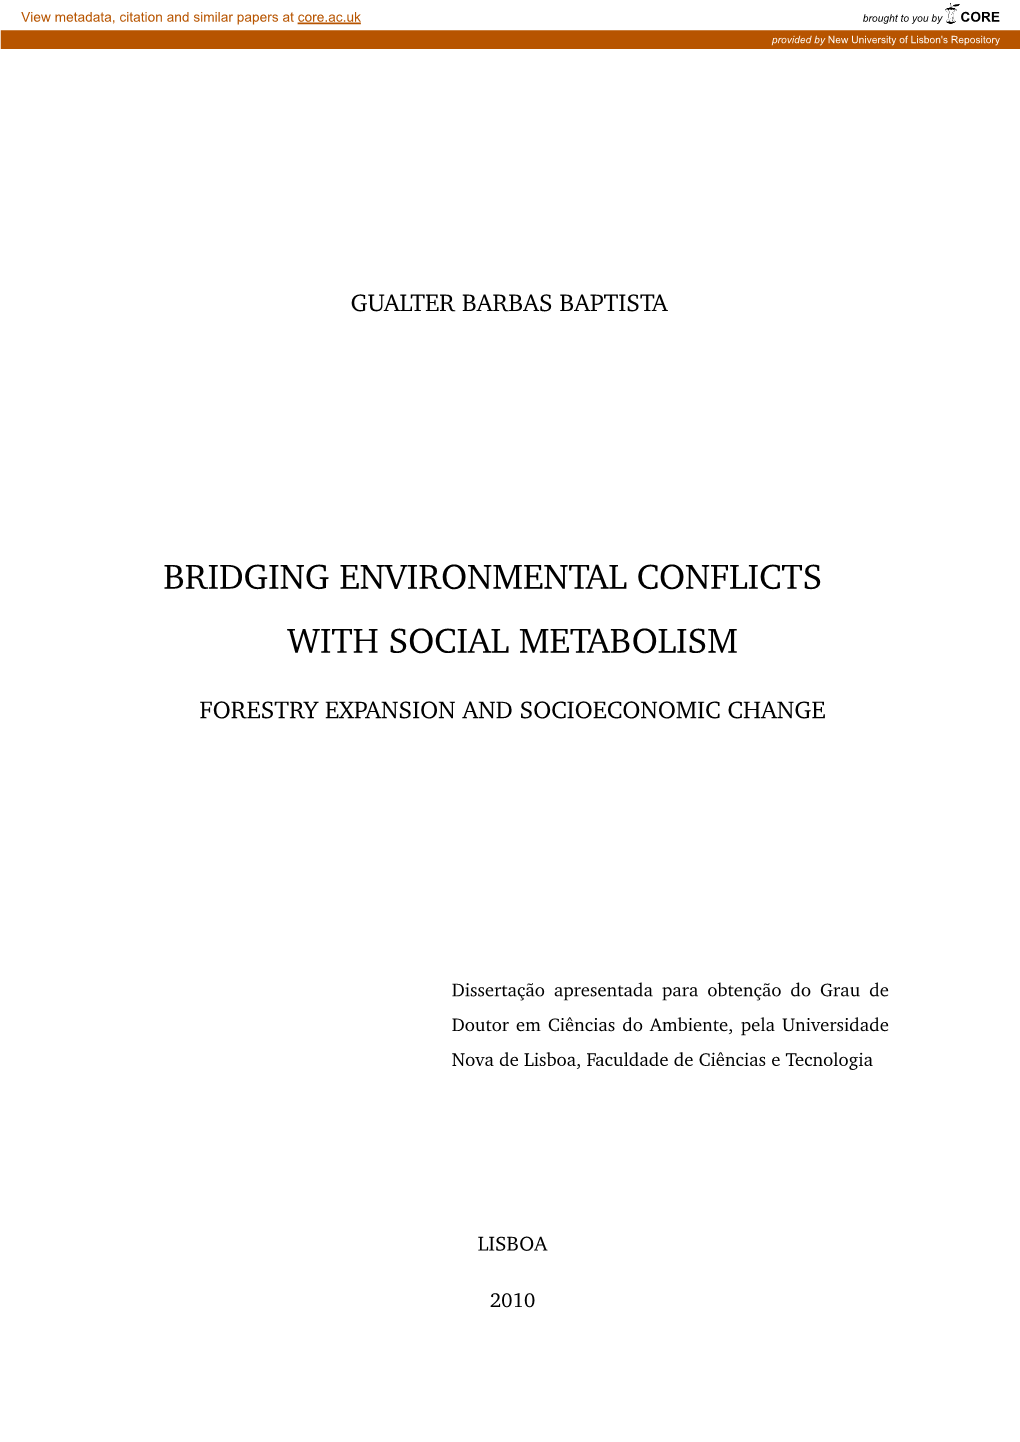 Bridging Environmental Conflicts with Social Metabolism